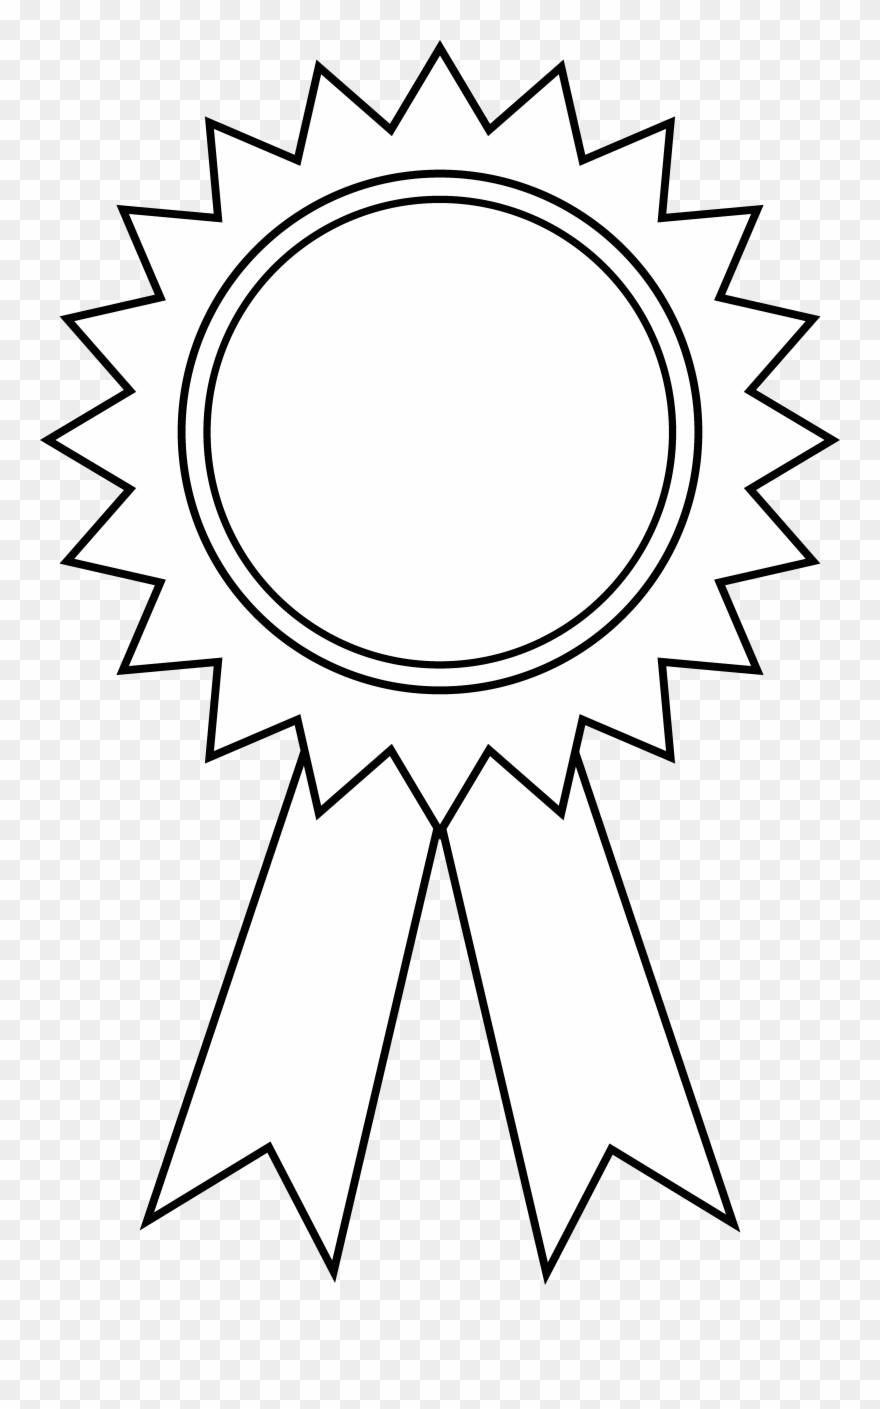 prize clipart black and white